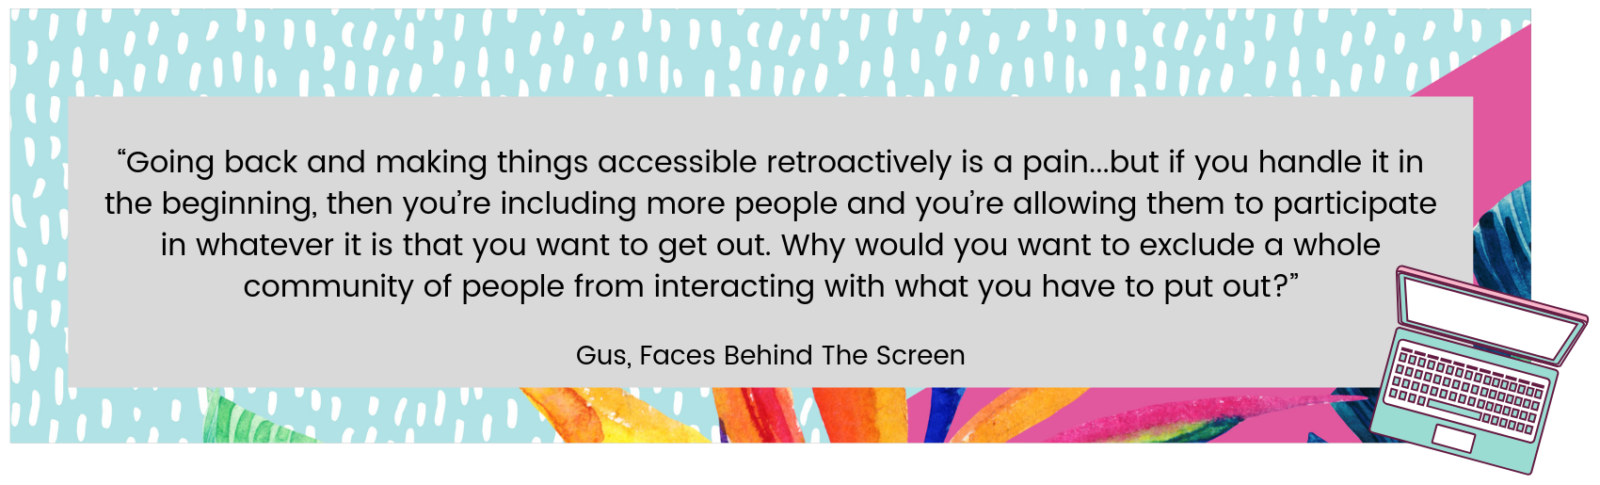 “Going back and making things accessible retroactively is a pain...but if you handle it in the beginning, then you’re including more people and you’re allowing them to participate in whatever it is that you want to get out. Why would you want to exclude a whole community of people from interacting with what you have to put out?” Gus, Faces Behind The Screen